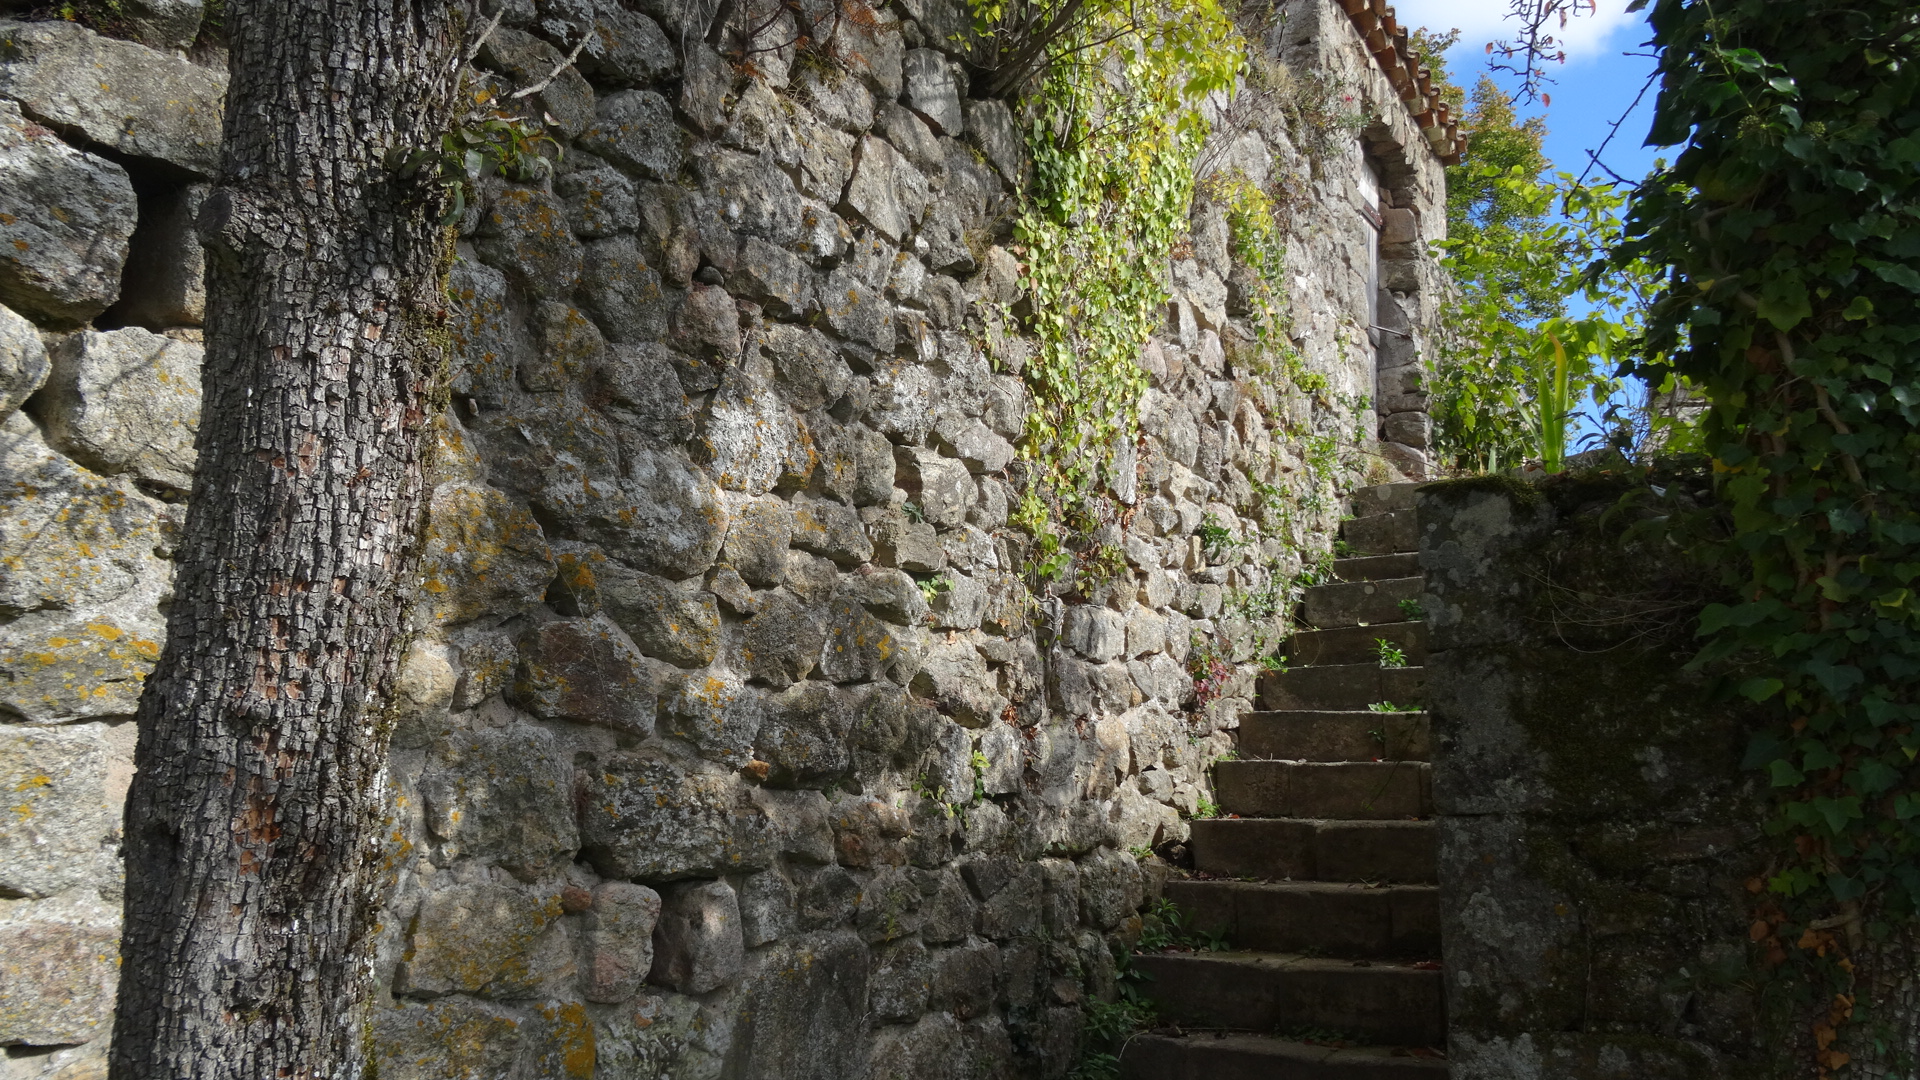 Access to the garden is via a small stone staircase